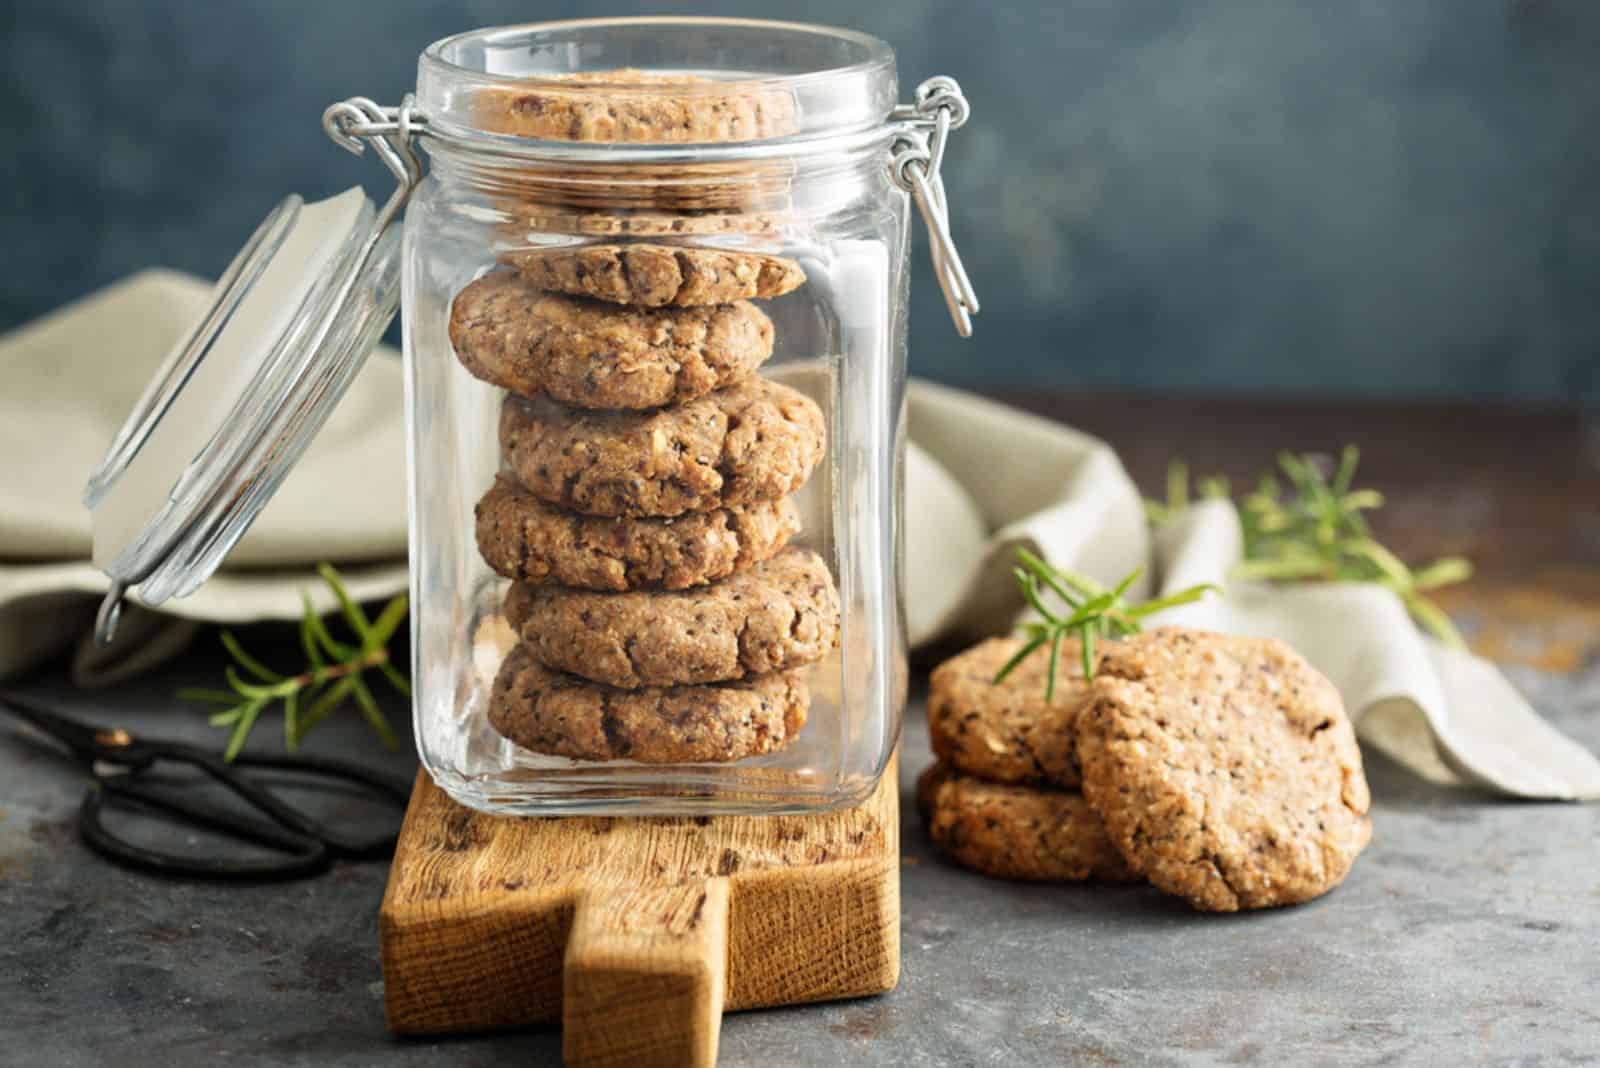 Healthy cookies with dried fruits and nuts in a glass jar